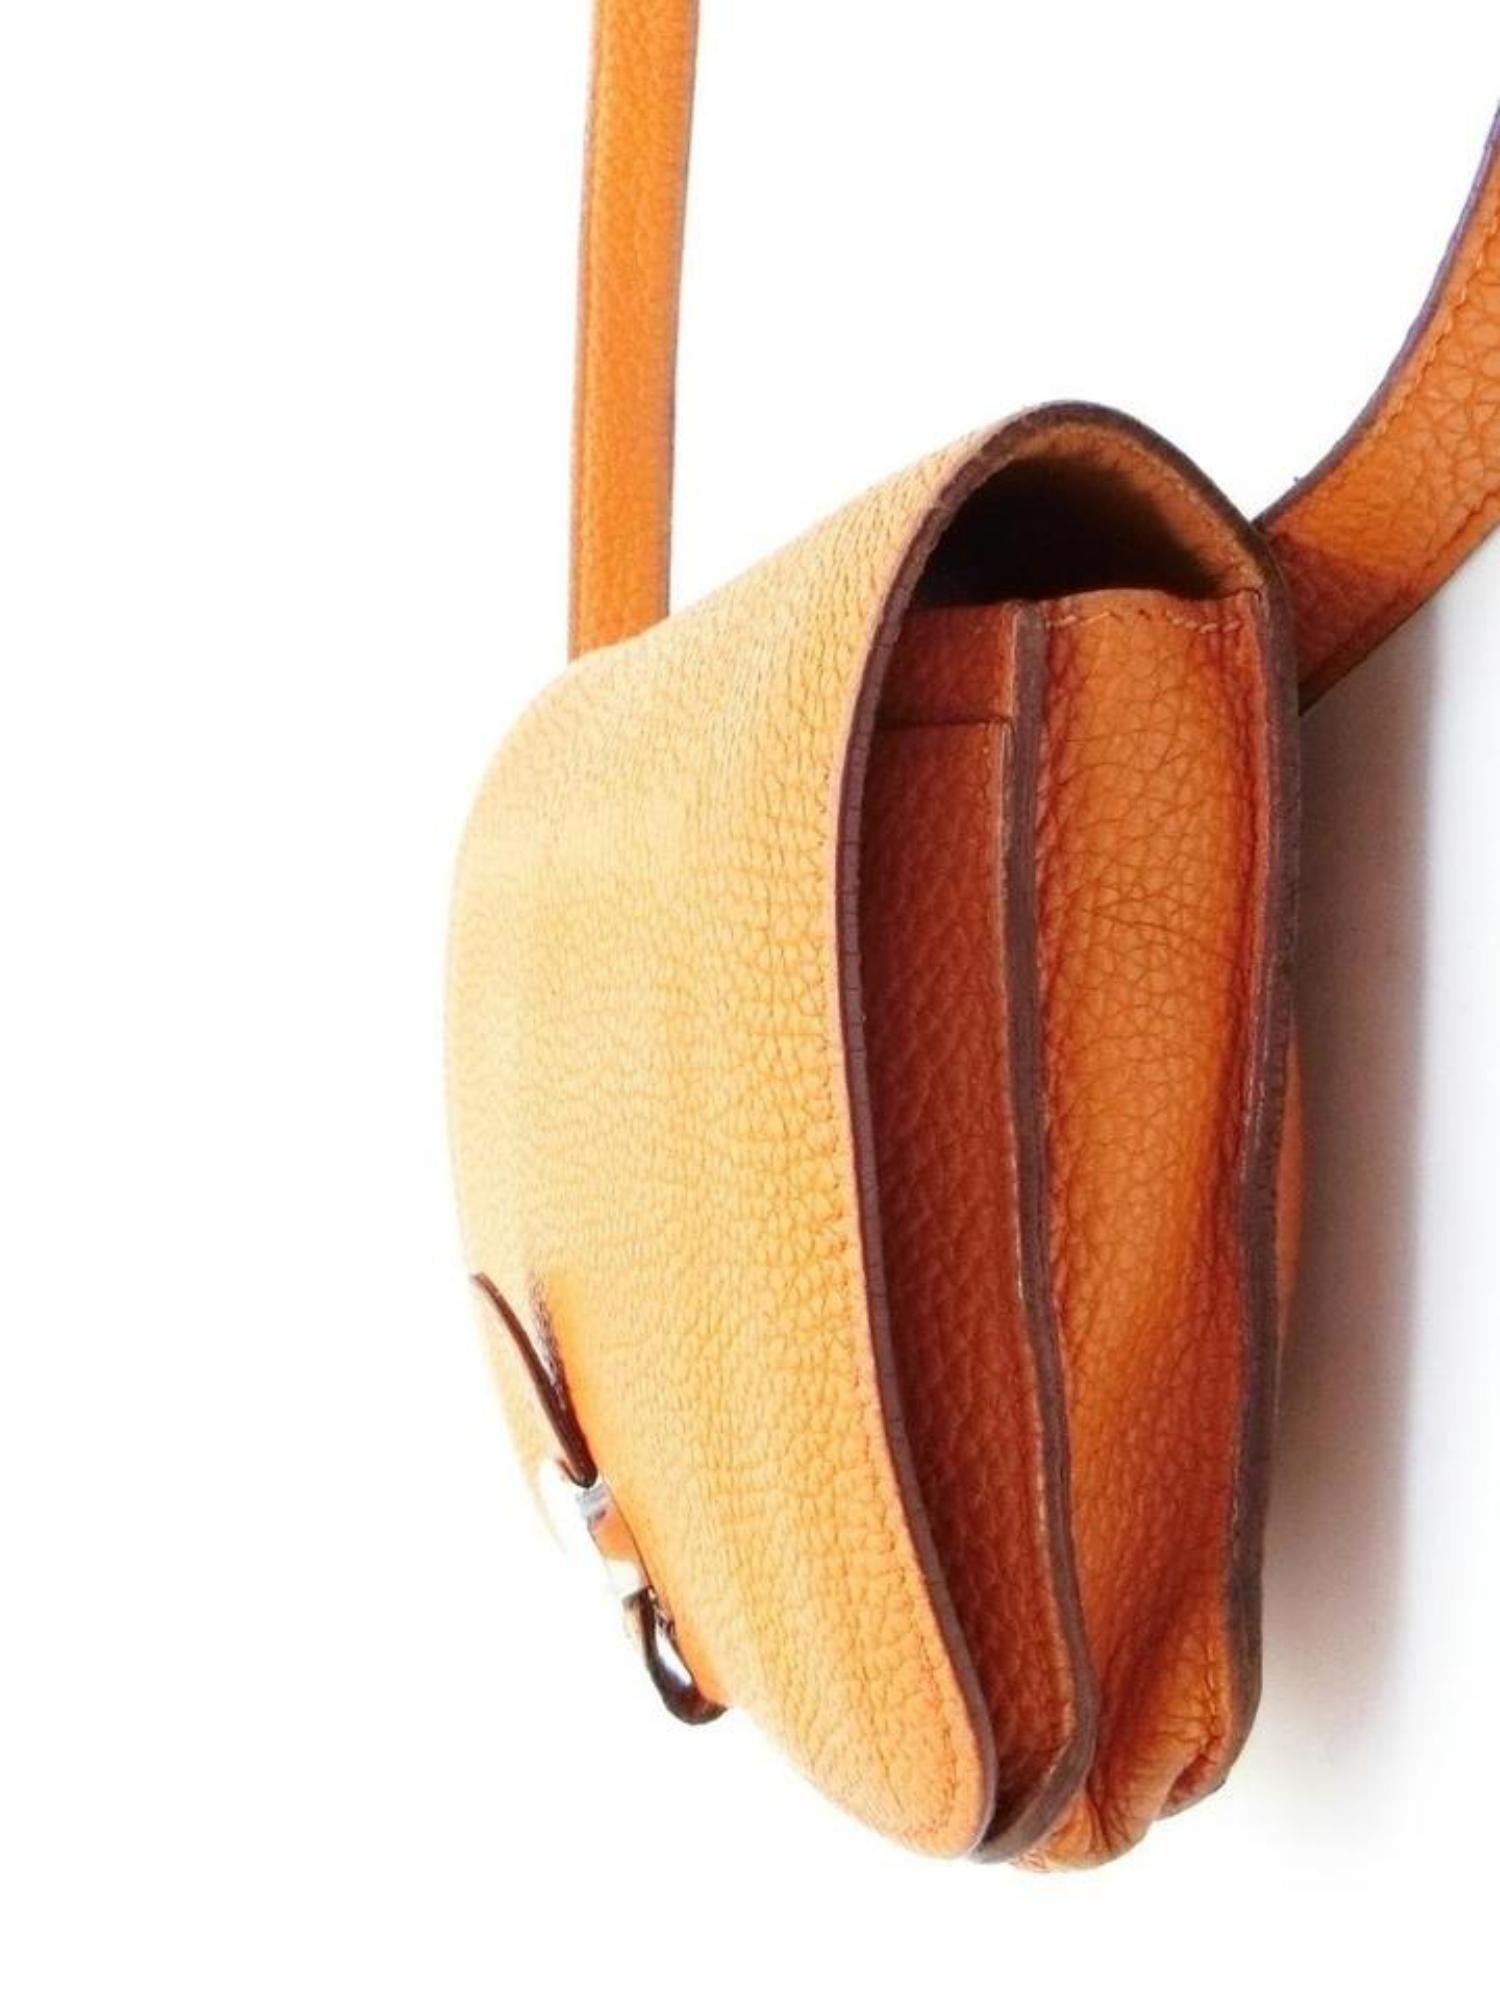 Hermès Dogon Waist Pouch Belt Fanny Pack 230499 Orange Leather Cross Body Bag In Good Condition For Sale In Forest Hills, NY